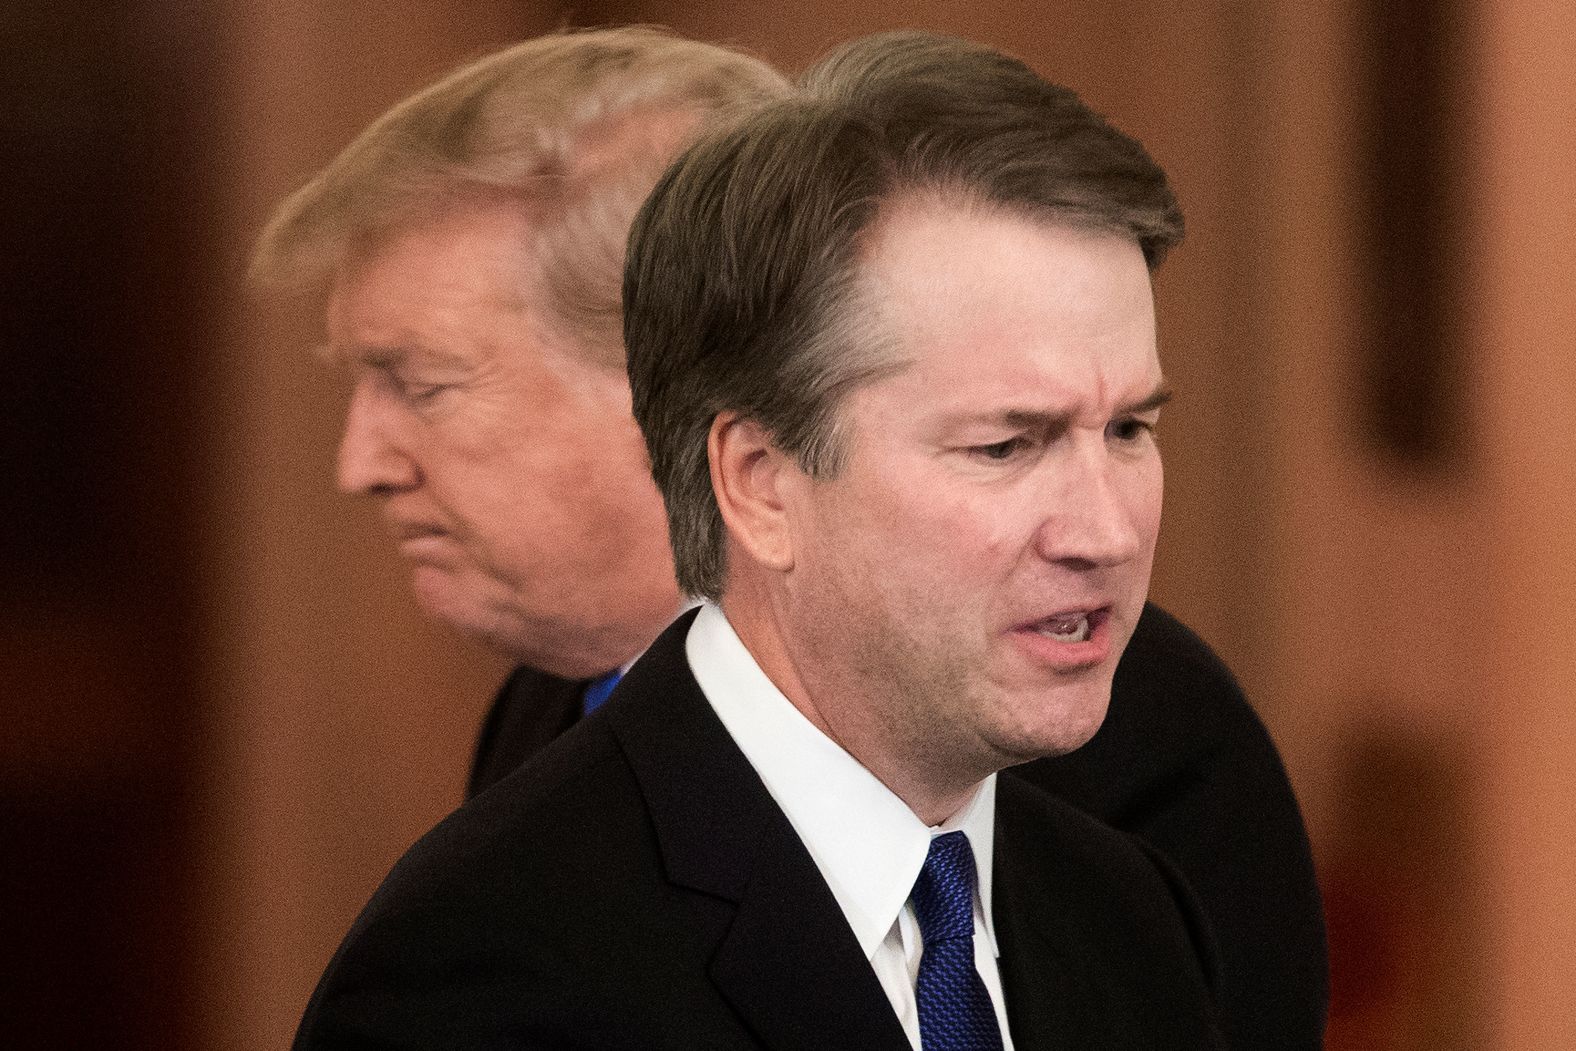 Trump announced in July 2018 that Brett Kavanaugh, foreground, was his choice to replace Supreme Court Justice Anthony Kennedy, who retired at the end of the month. Kavanaugh, who once clerked for Kennedy, <a href="index.php?page=&url=https%3A%2F%2Fwww.cnn.com%2F2018%2F10%2F06%2Fpolitics%2Fkavanaugh-final-confirmation-vote%2Findex.html" target="_blank">was confirmed</a> in October 2018.